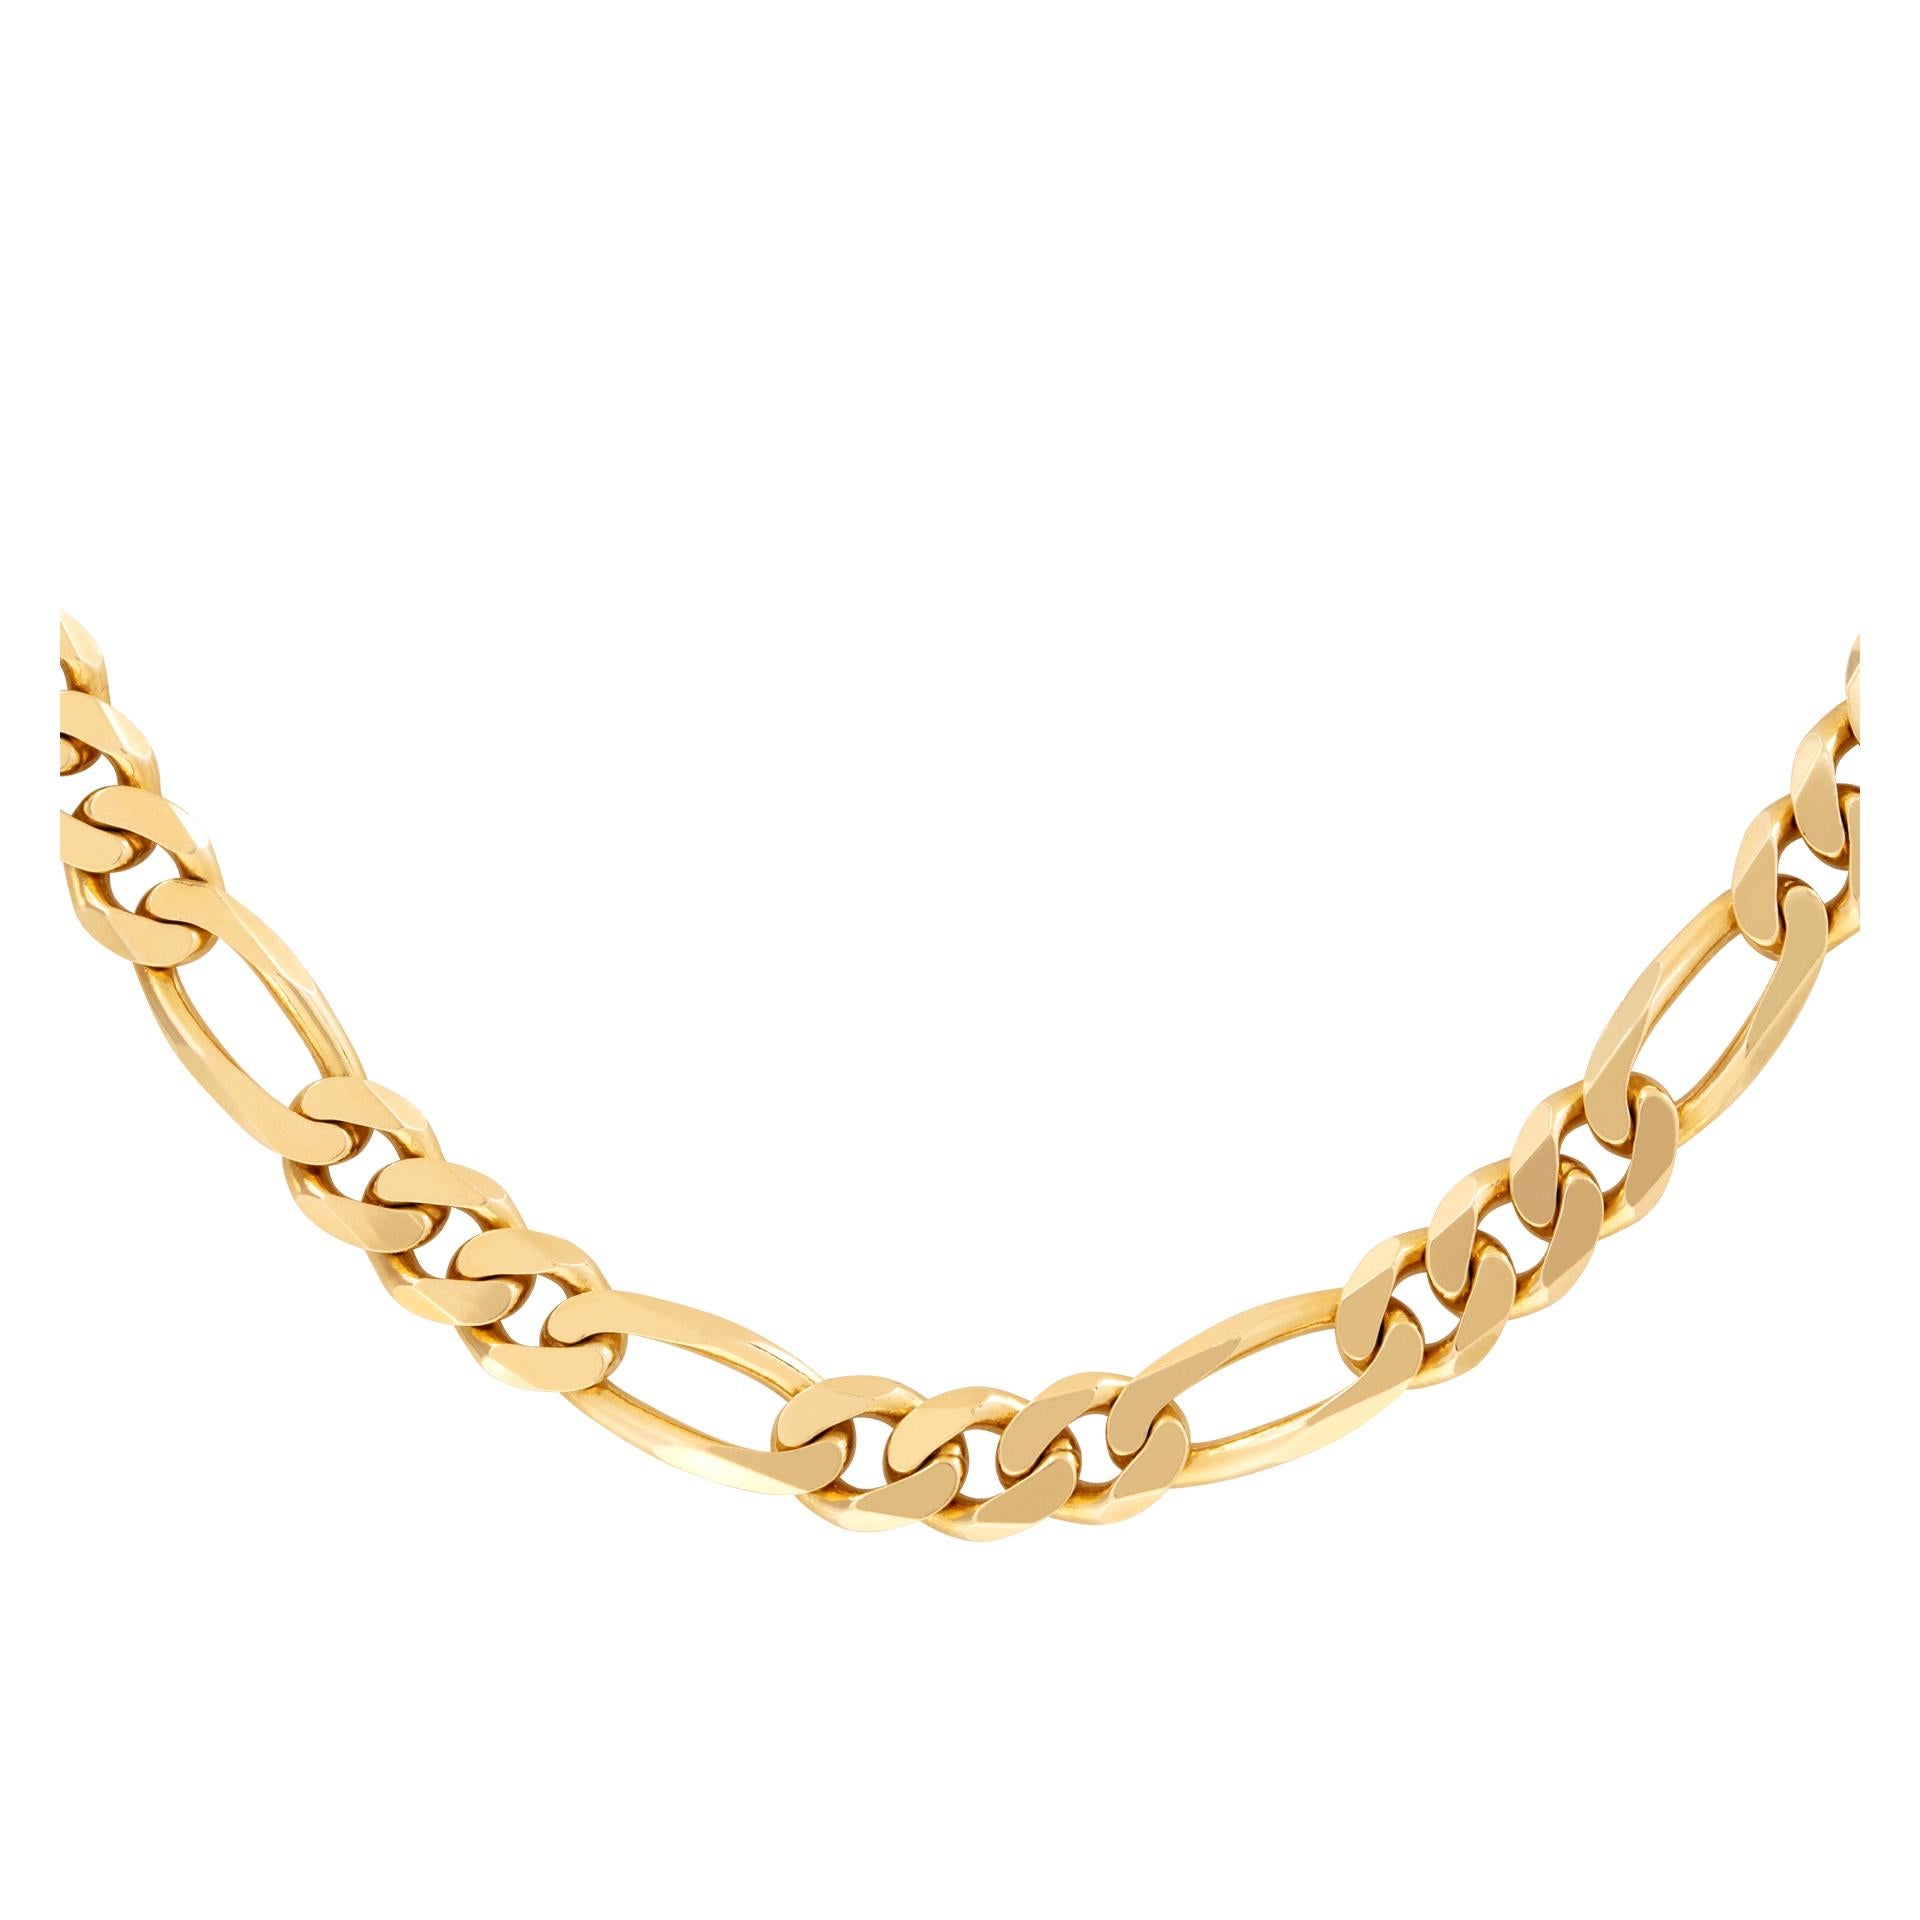 Mens Figaro chain in 18k yellow gold. Length 27 inches. Width 6.2 mm.
